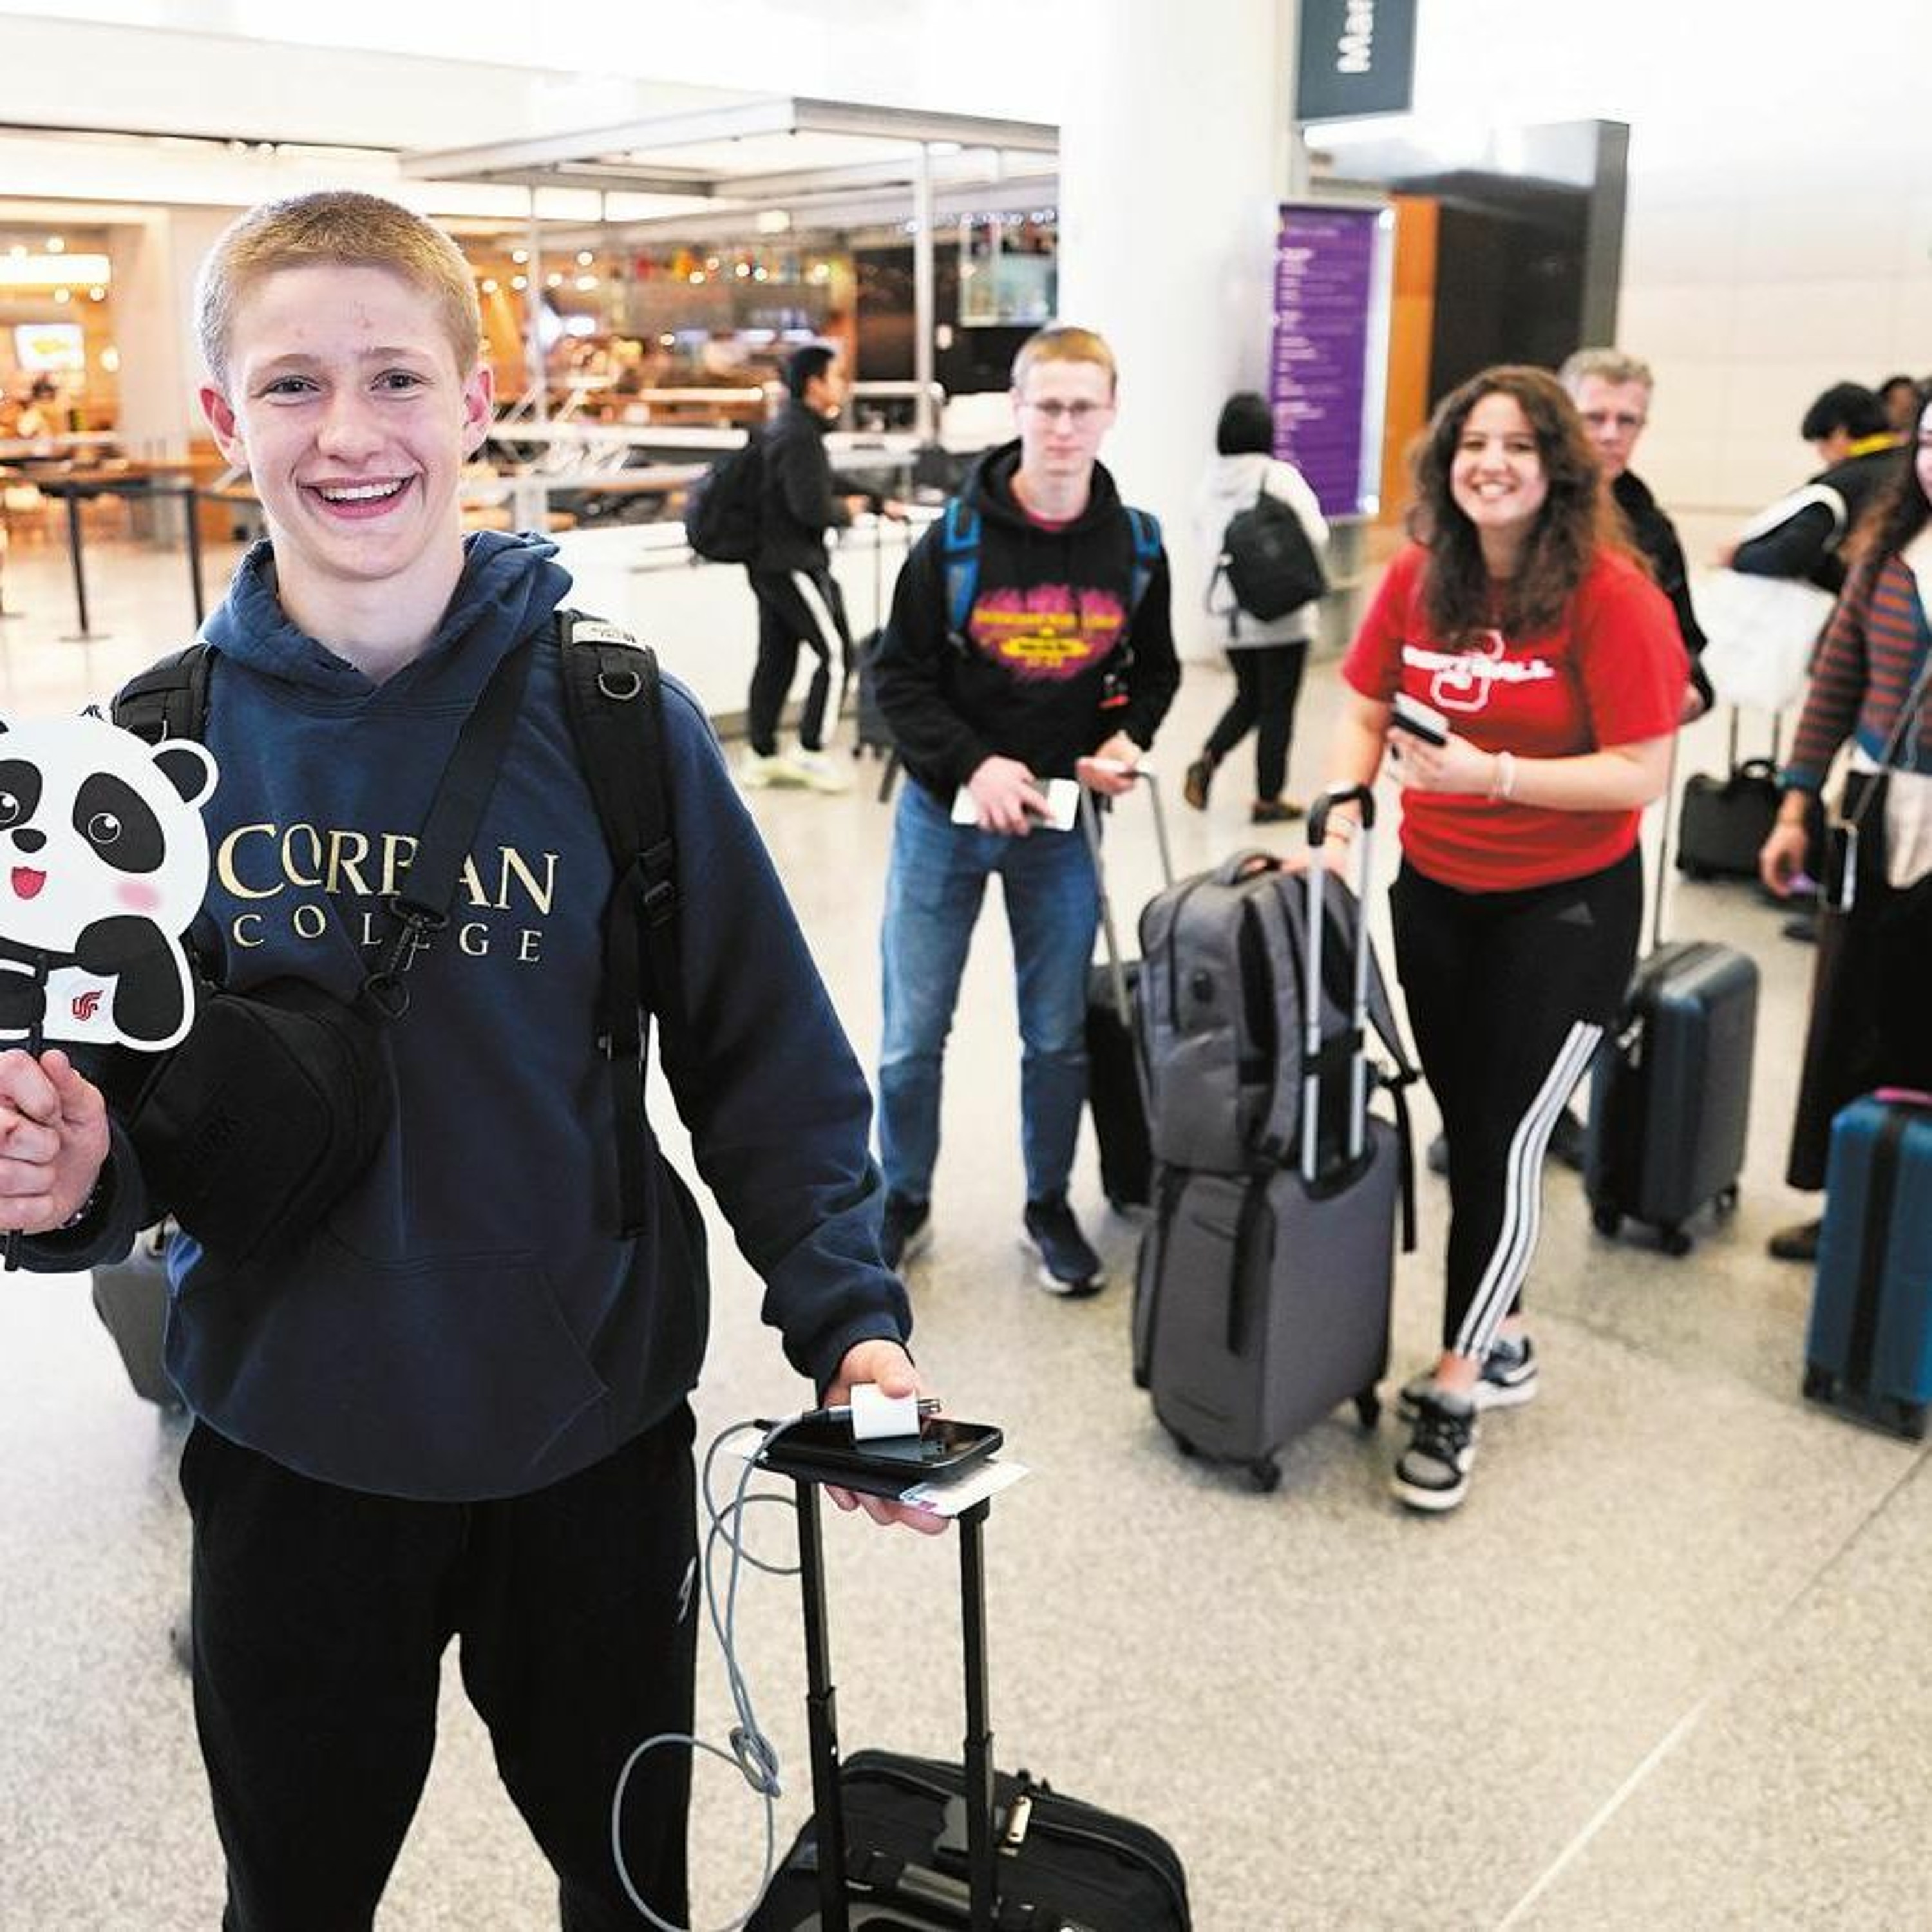 Eager U.S Students Embark On China Adventure. China Daily Global Insights